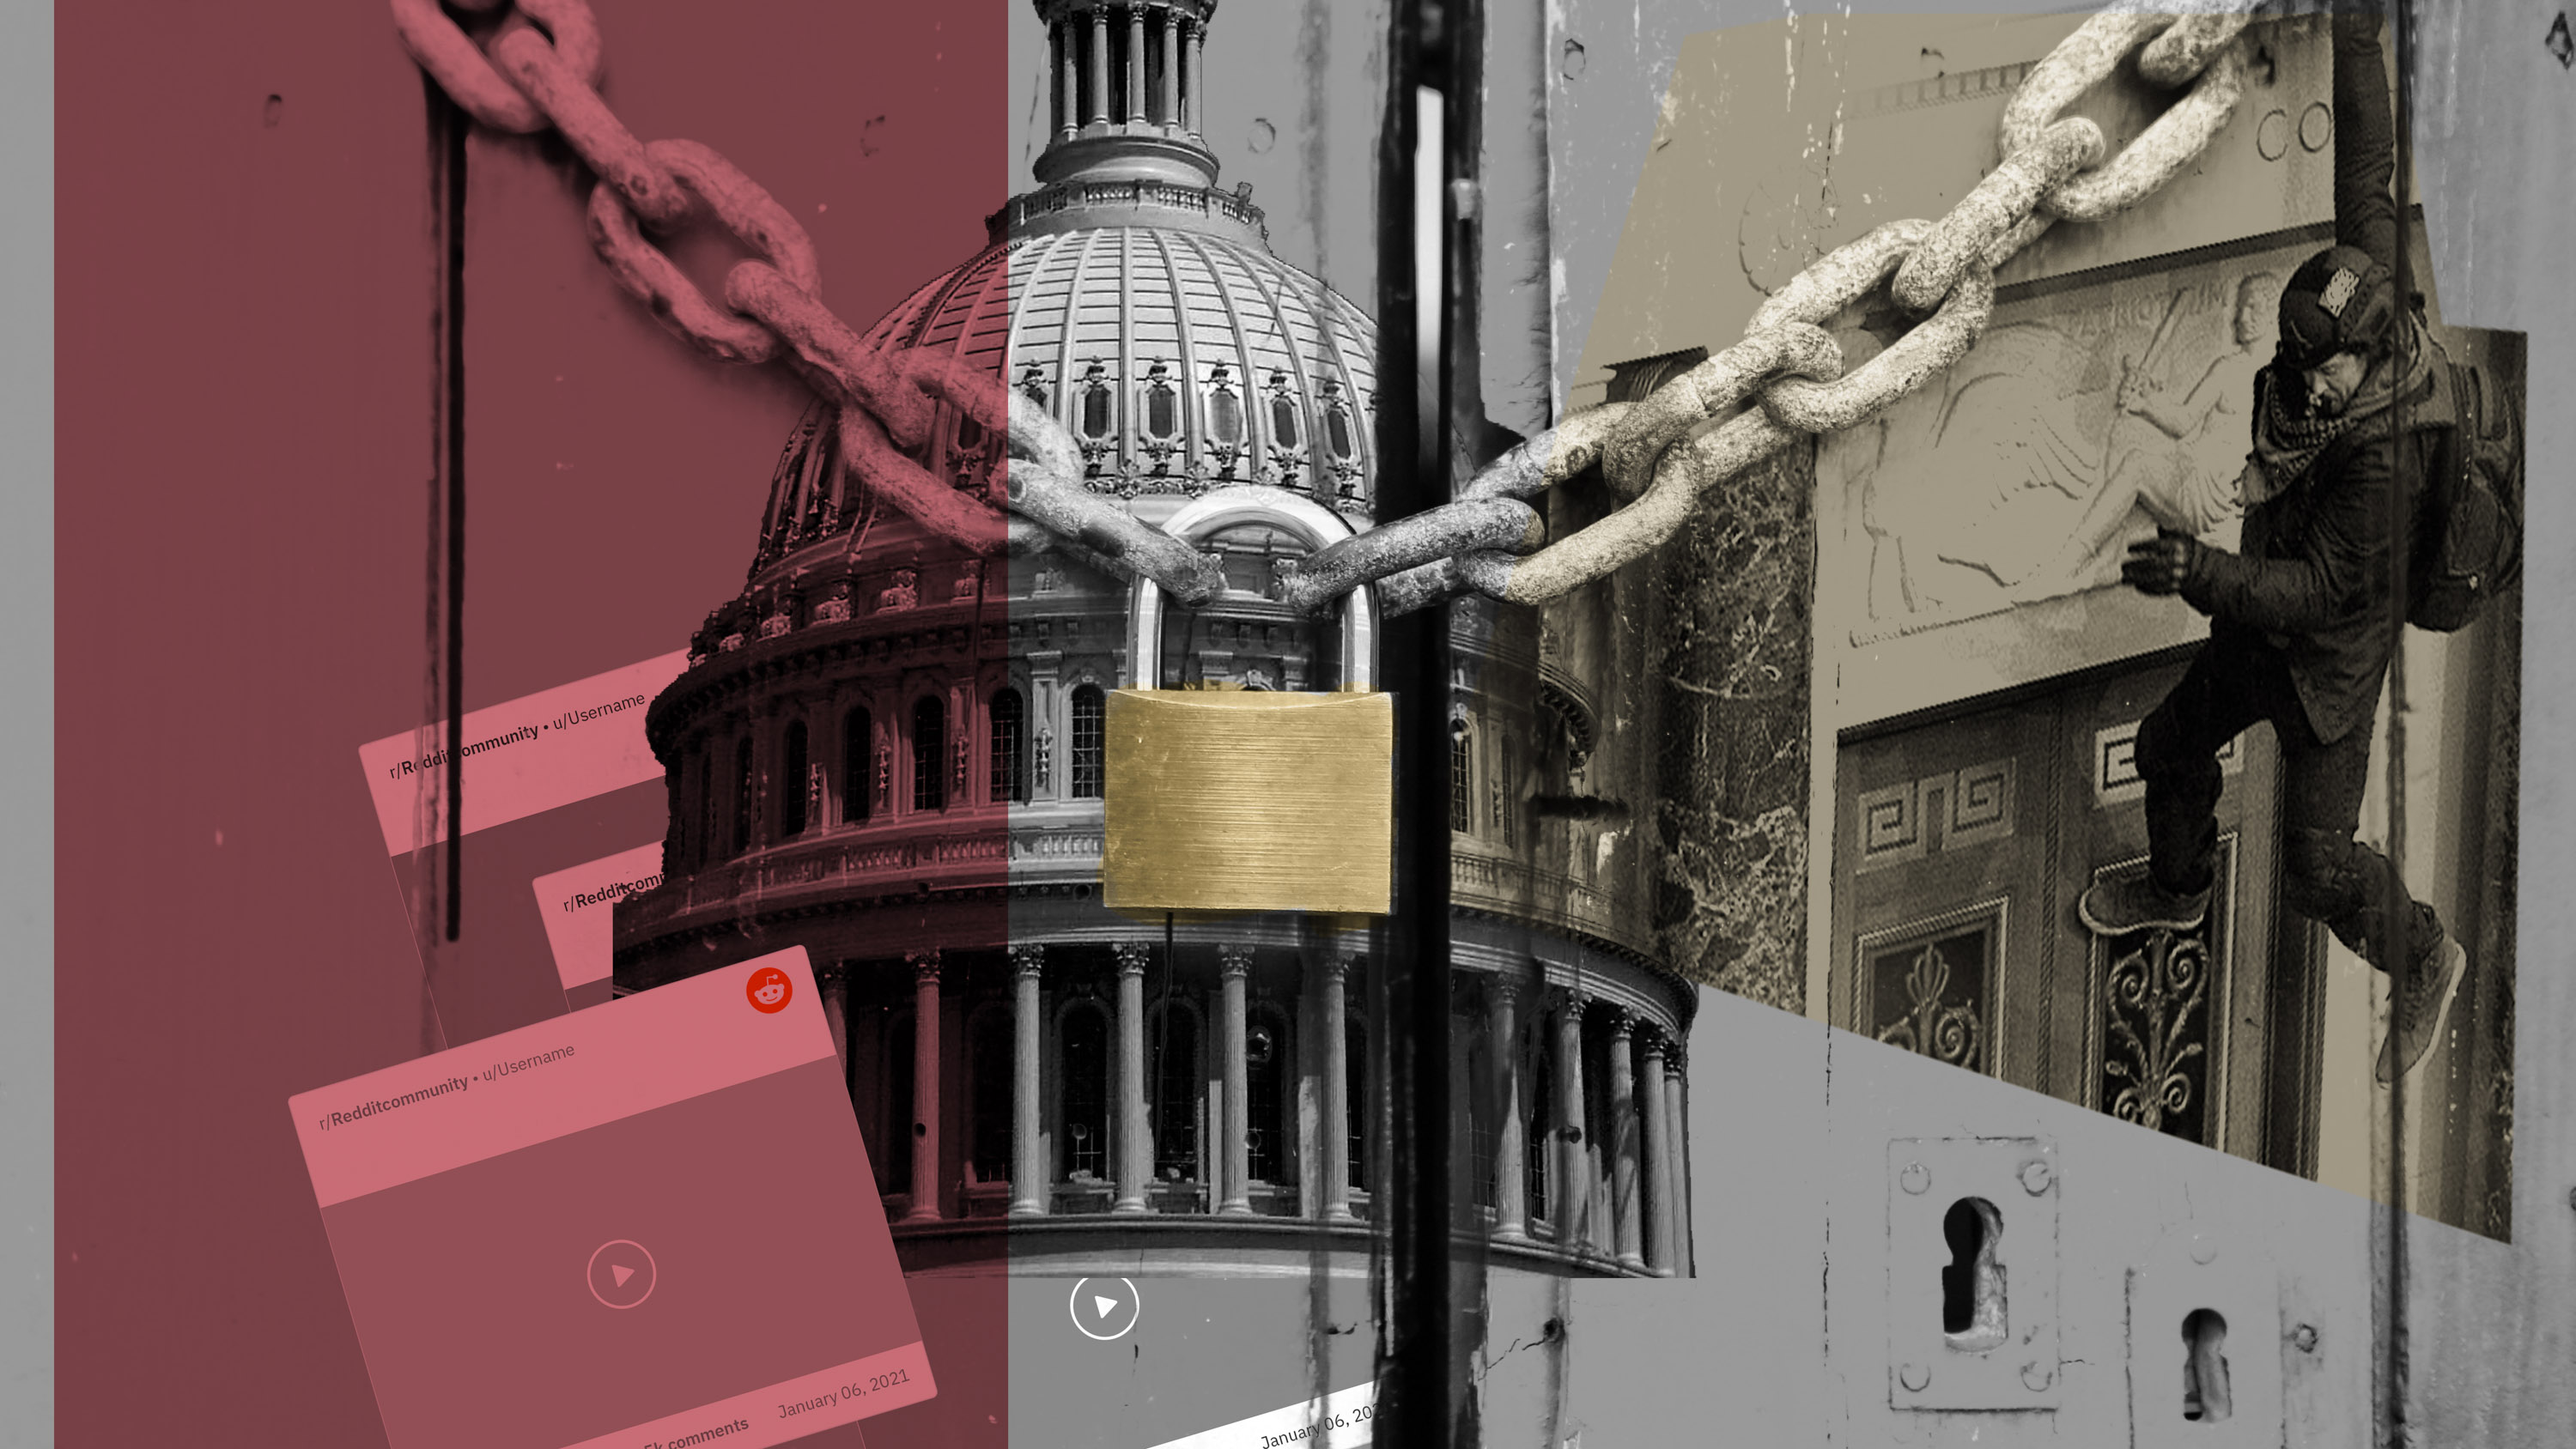 image showing capitol building in washington with images of mob and social media screen grabs over it with lock and chain overlaid on top